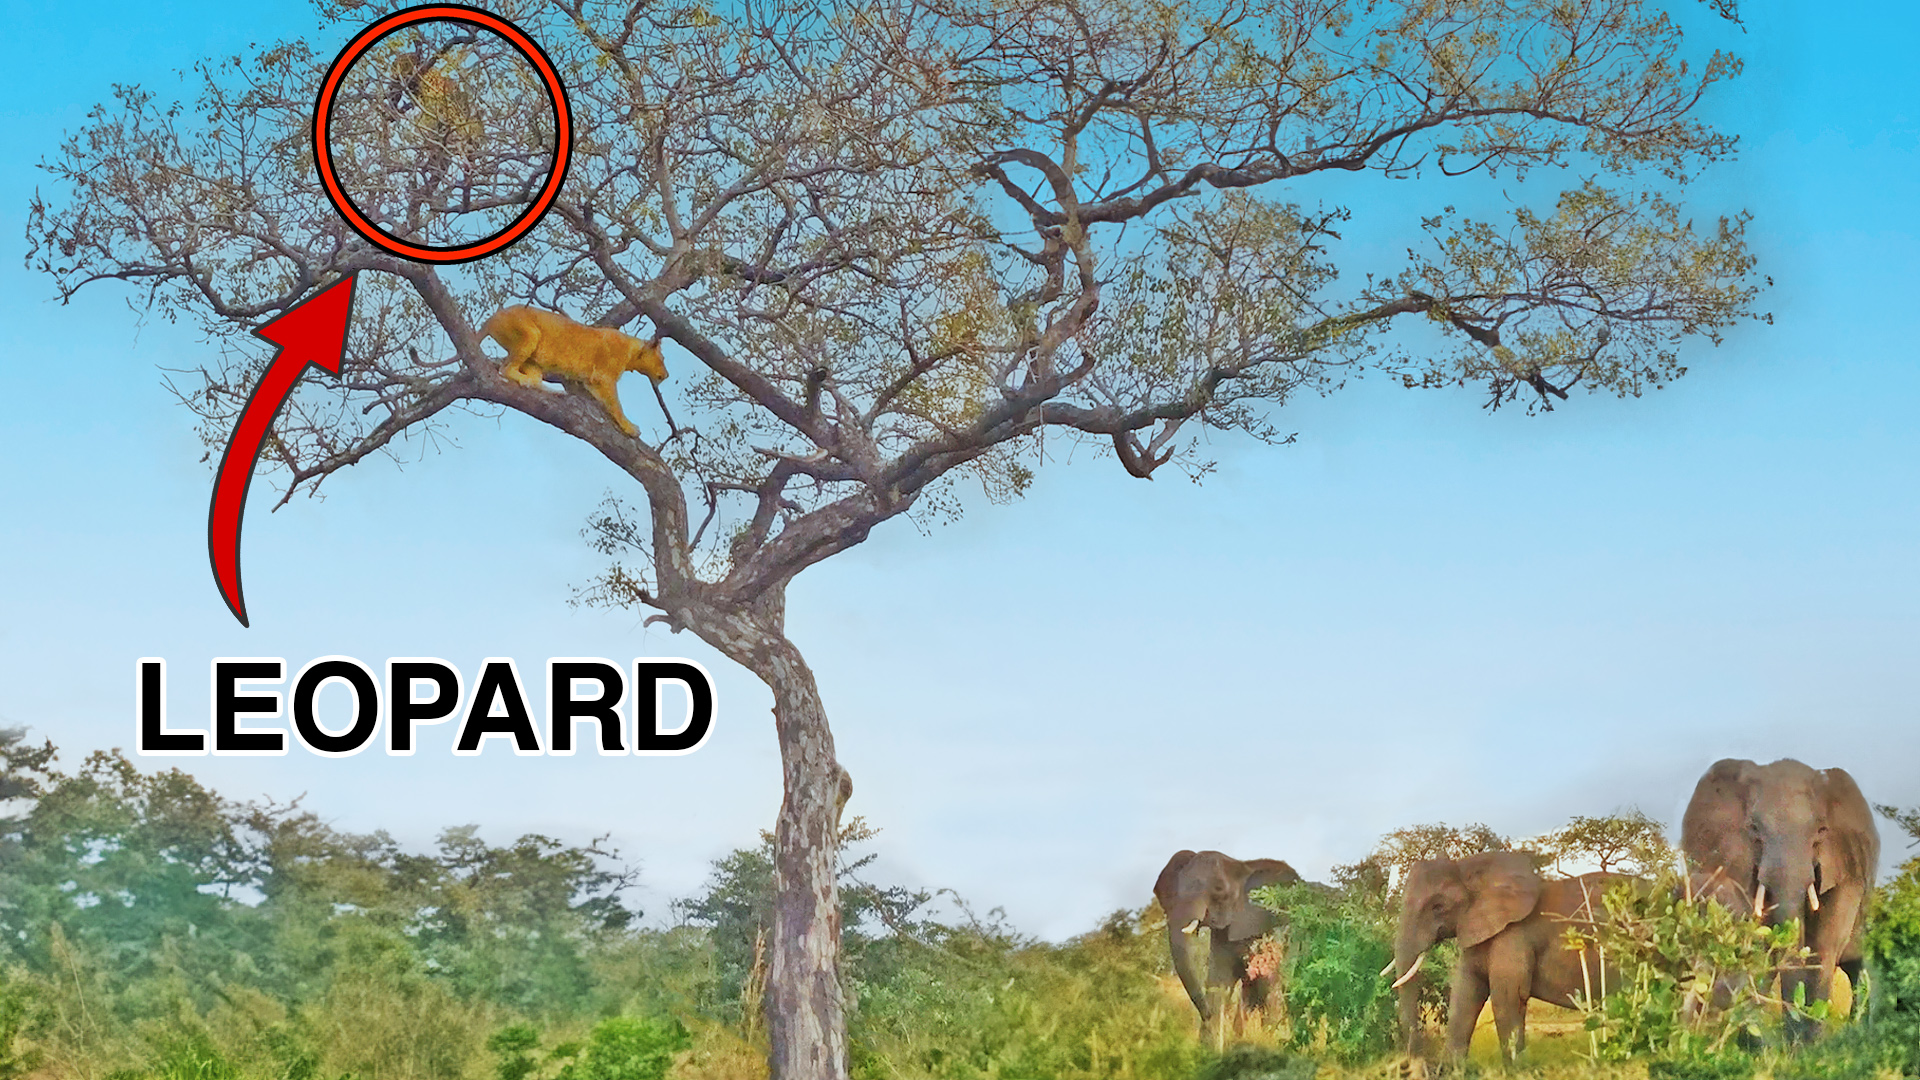 Elephants Save Leopard From Lions in Tree